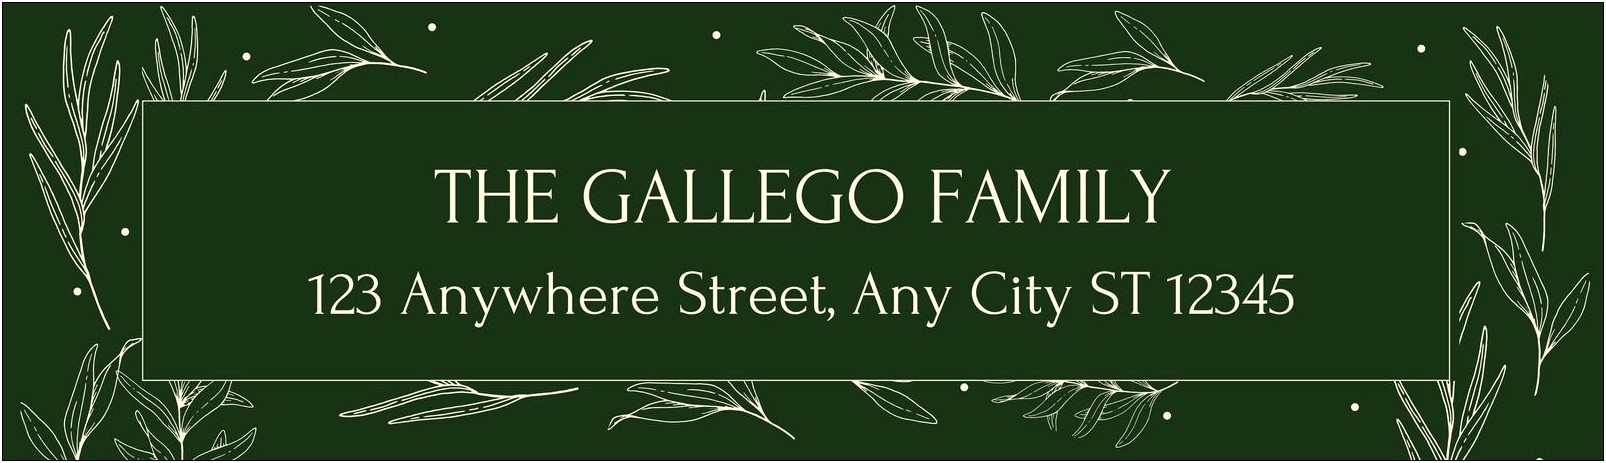 Free Address Labels Templates For Christmas